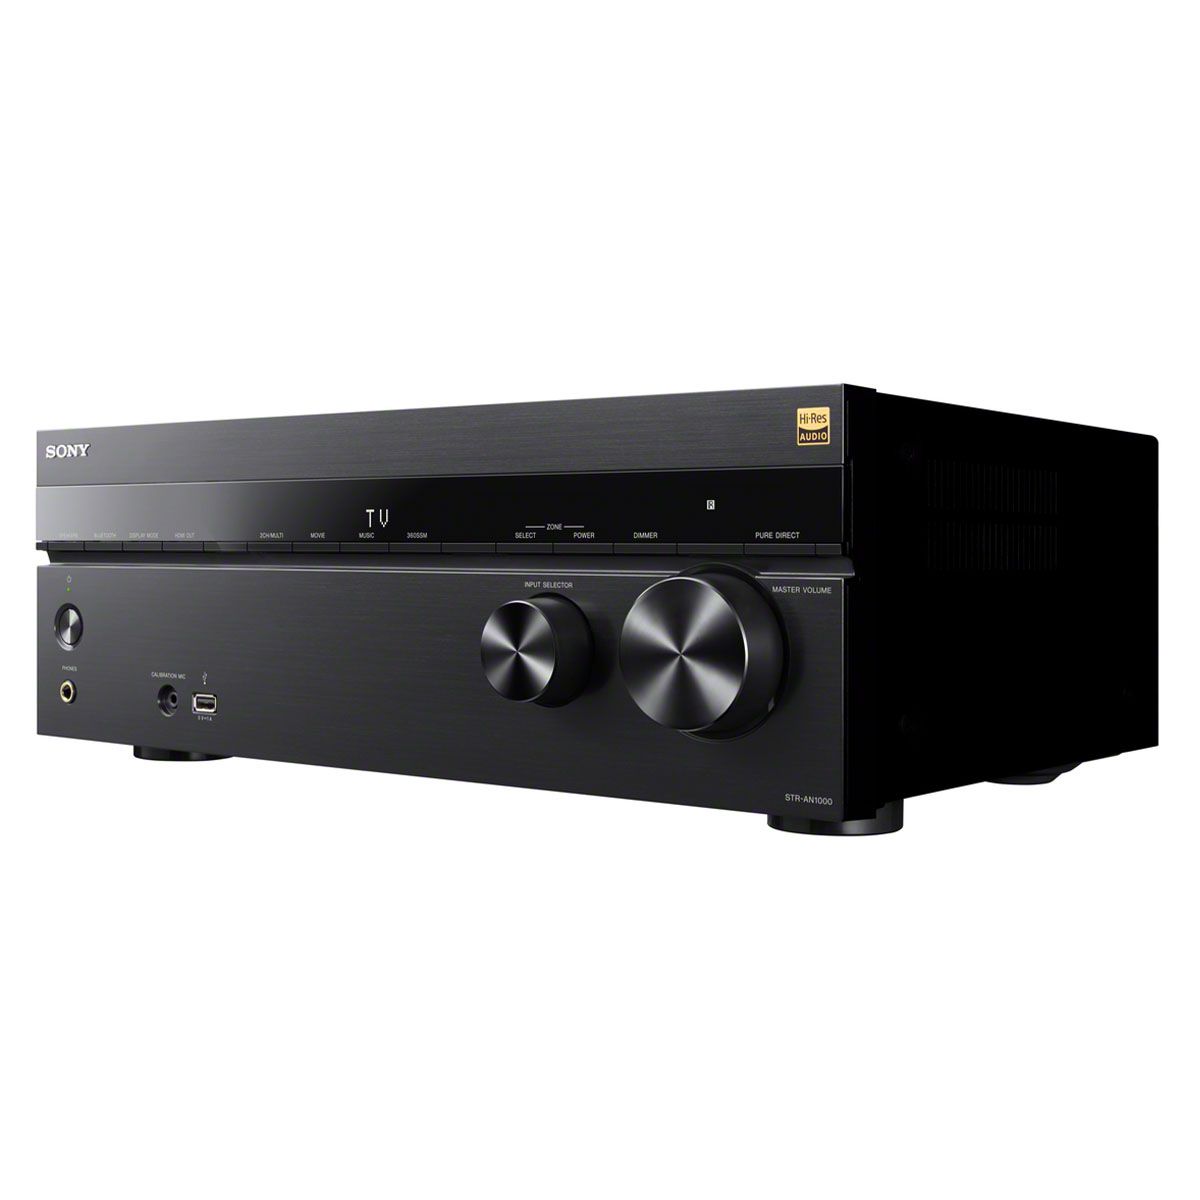 Sony STR-AN1000 Home Theater Receiver - angled front view